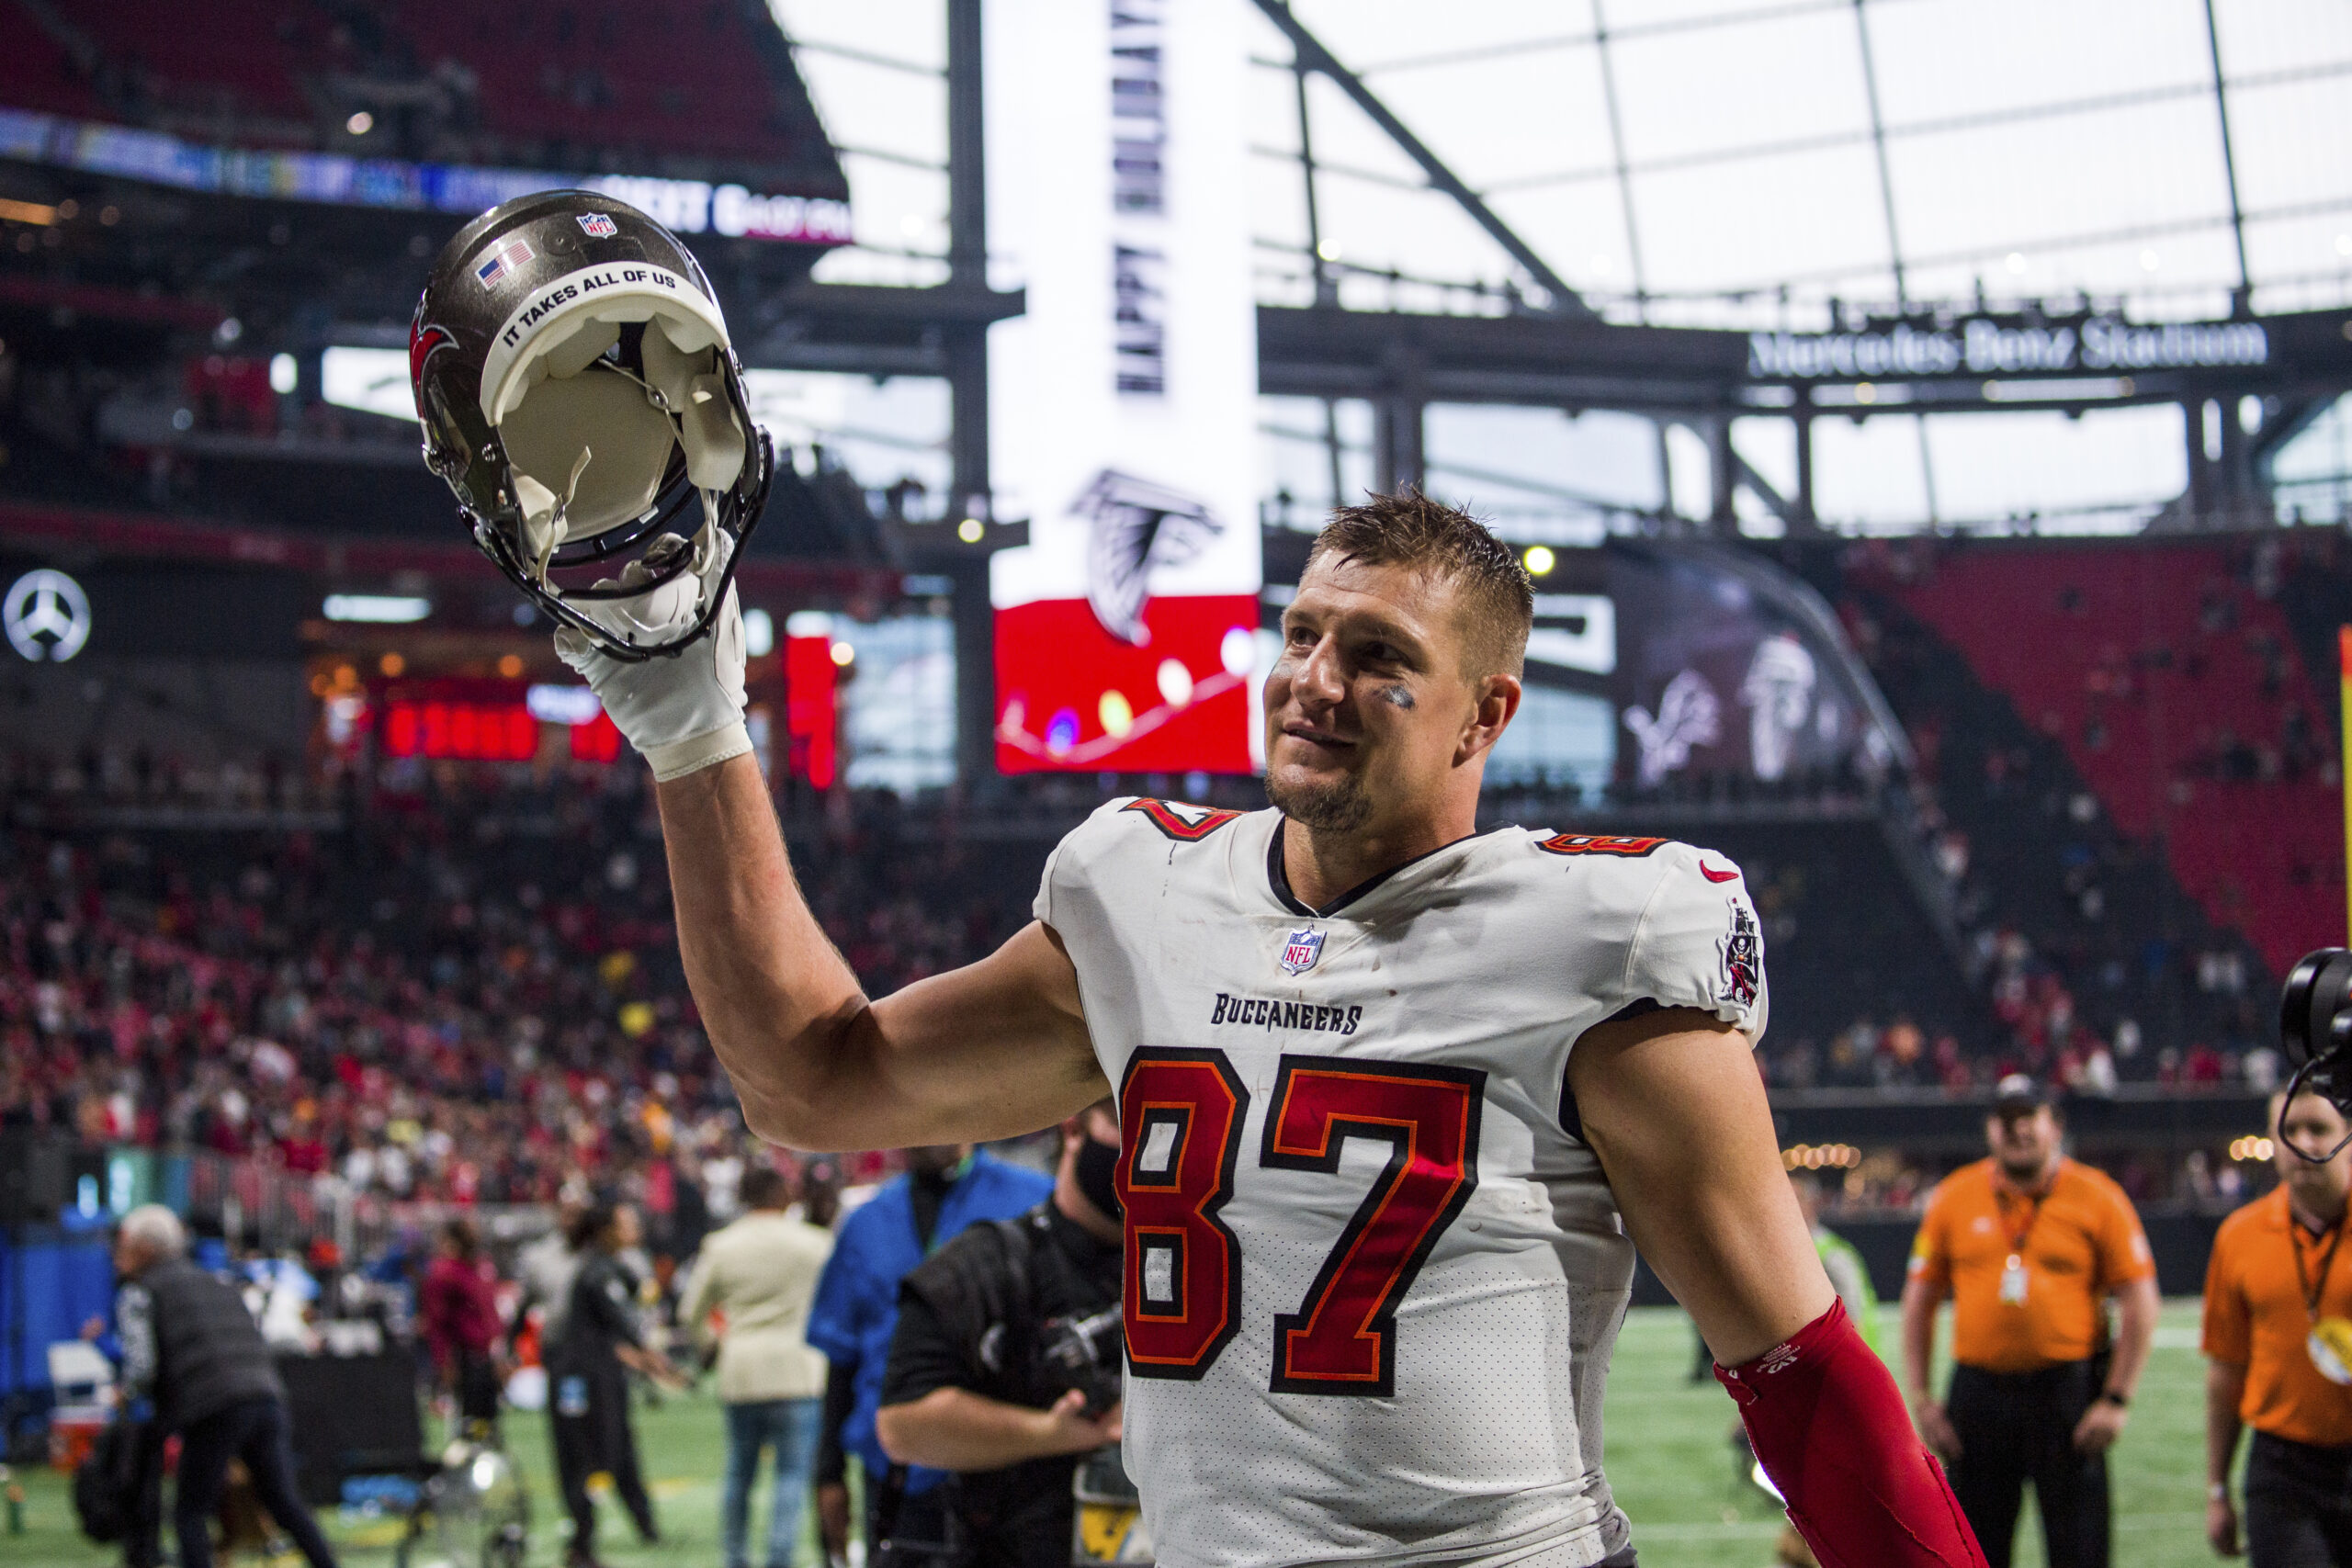 FILE - Tampa Bay Buccaneers tight end Rob Gronkowski (87) waves to fans after an NFL football game, Sunday, Dec. 5, 2021, in Atlanta. The Tampa Bay Buccaneers won 30-17. Four-time All-Pro tight end Rob Gronkowski announced his retirement again, Tuesday, June 21, 2022. (AP Photo/Danny Karnik, File)